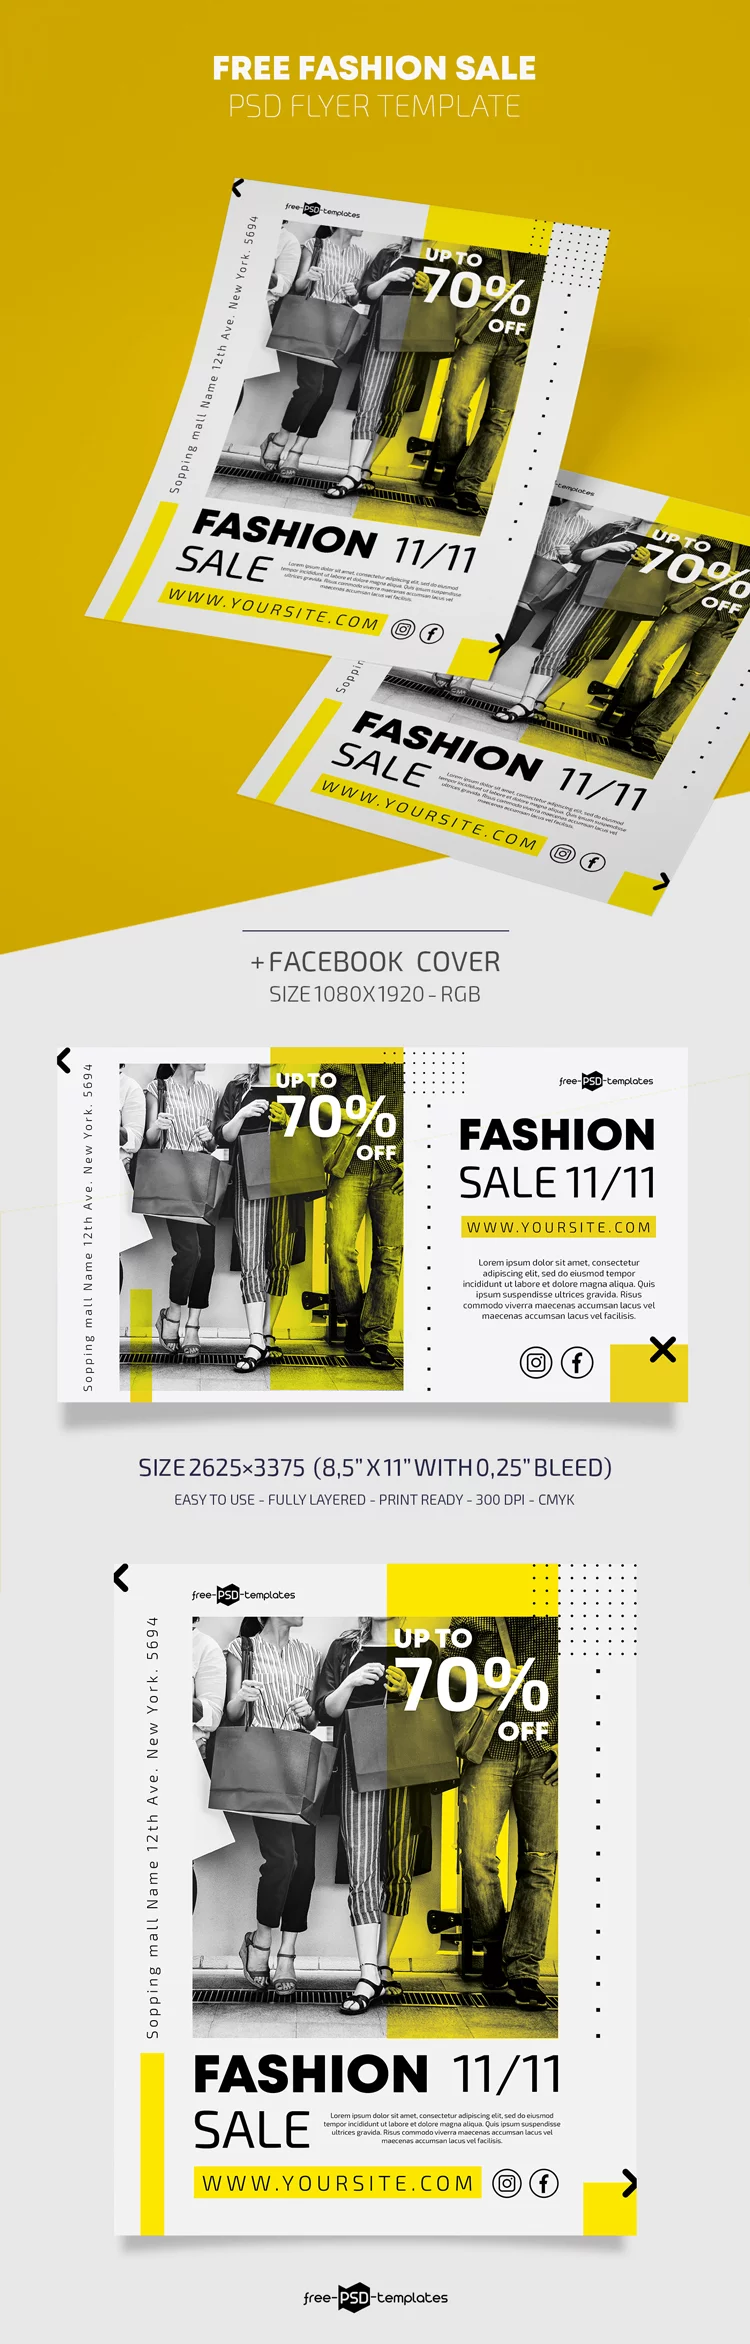 Free Fashion Sale Flyer Template in PSD